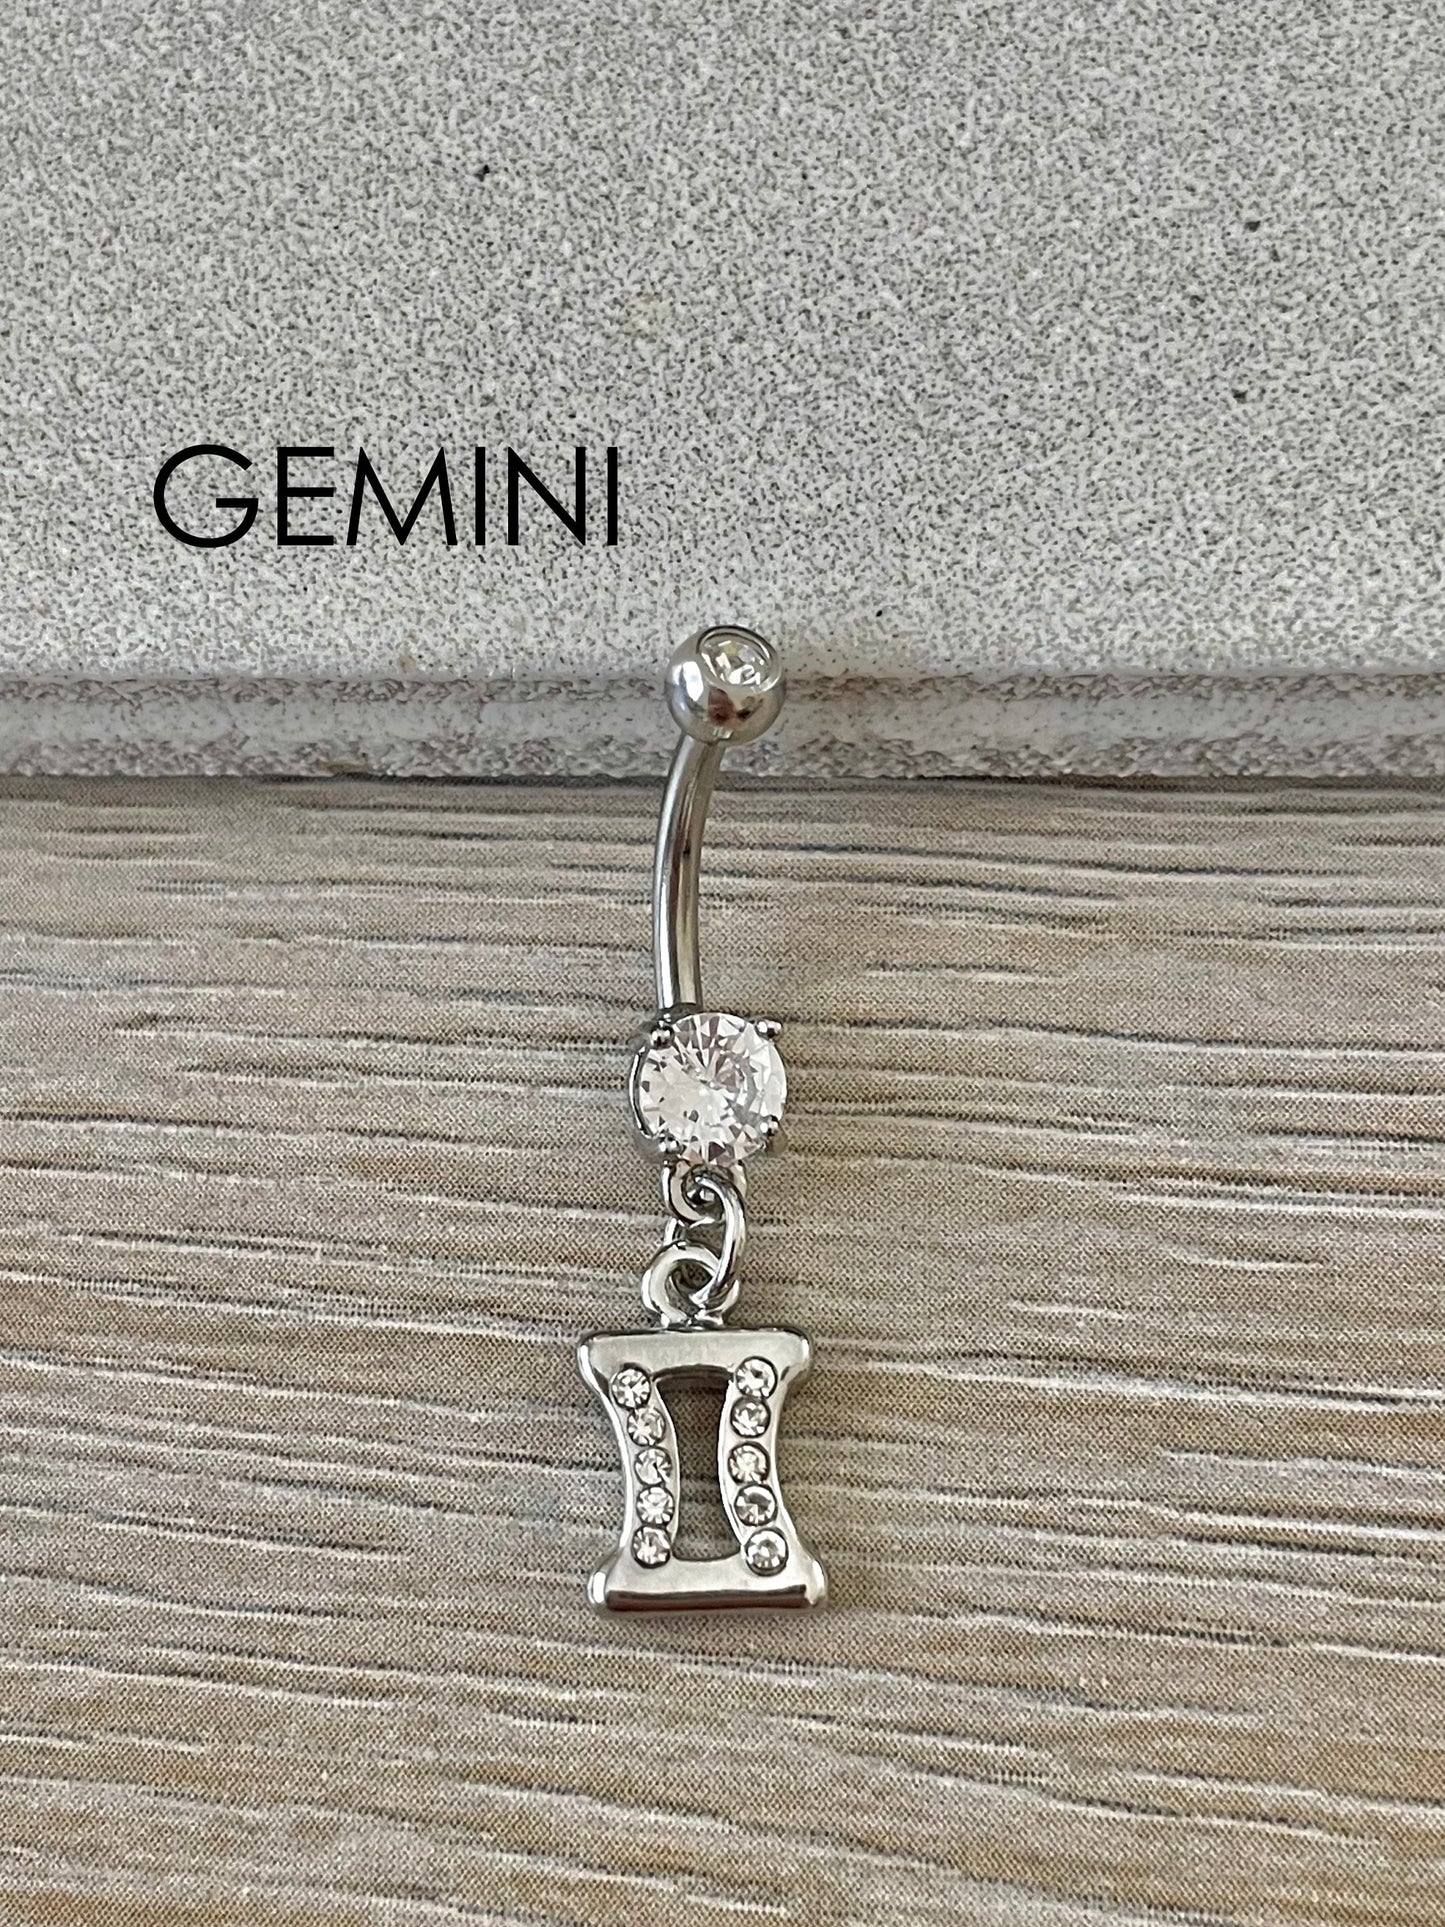 Virgo Belly Button Ring (14G | 10mm | Surgical Steel | All Zodiac Signs)